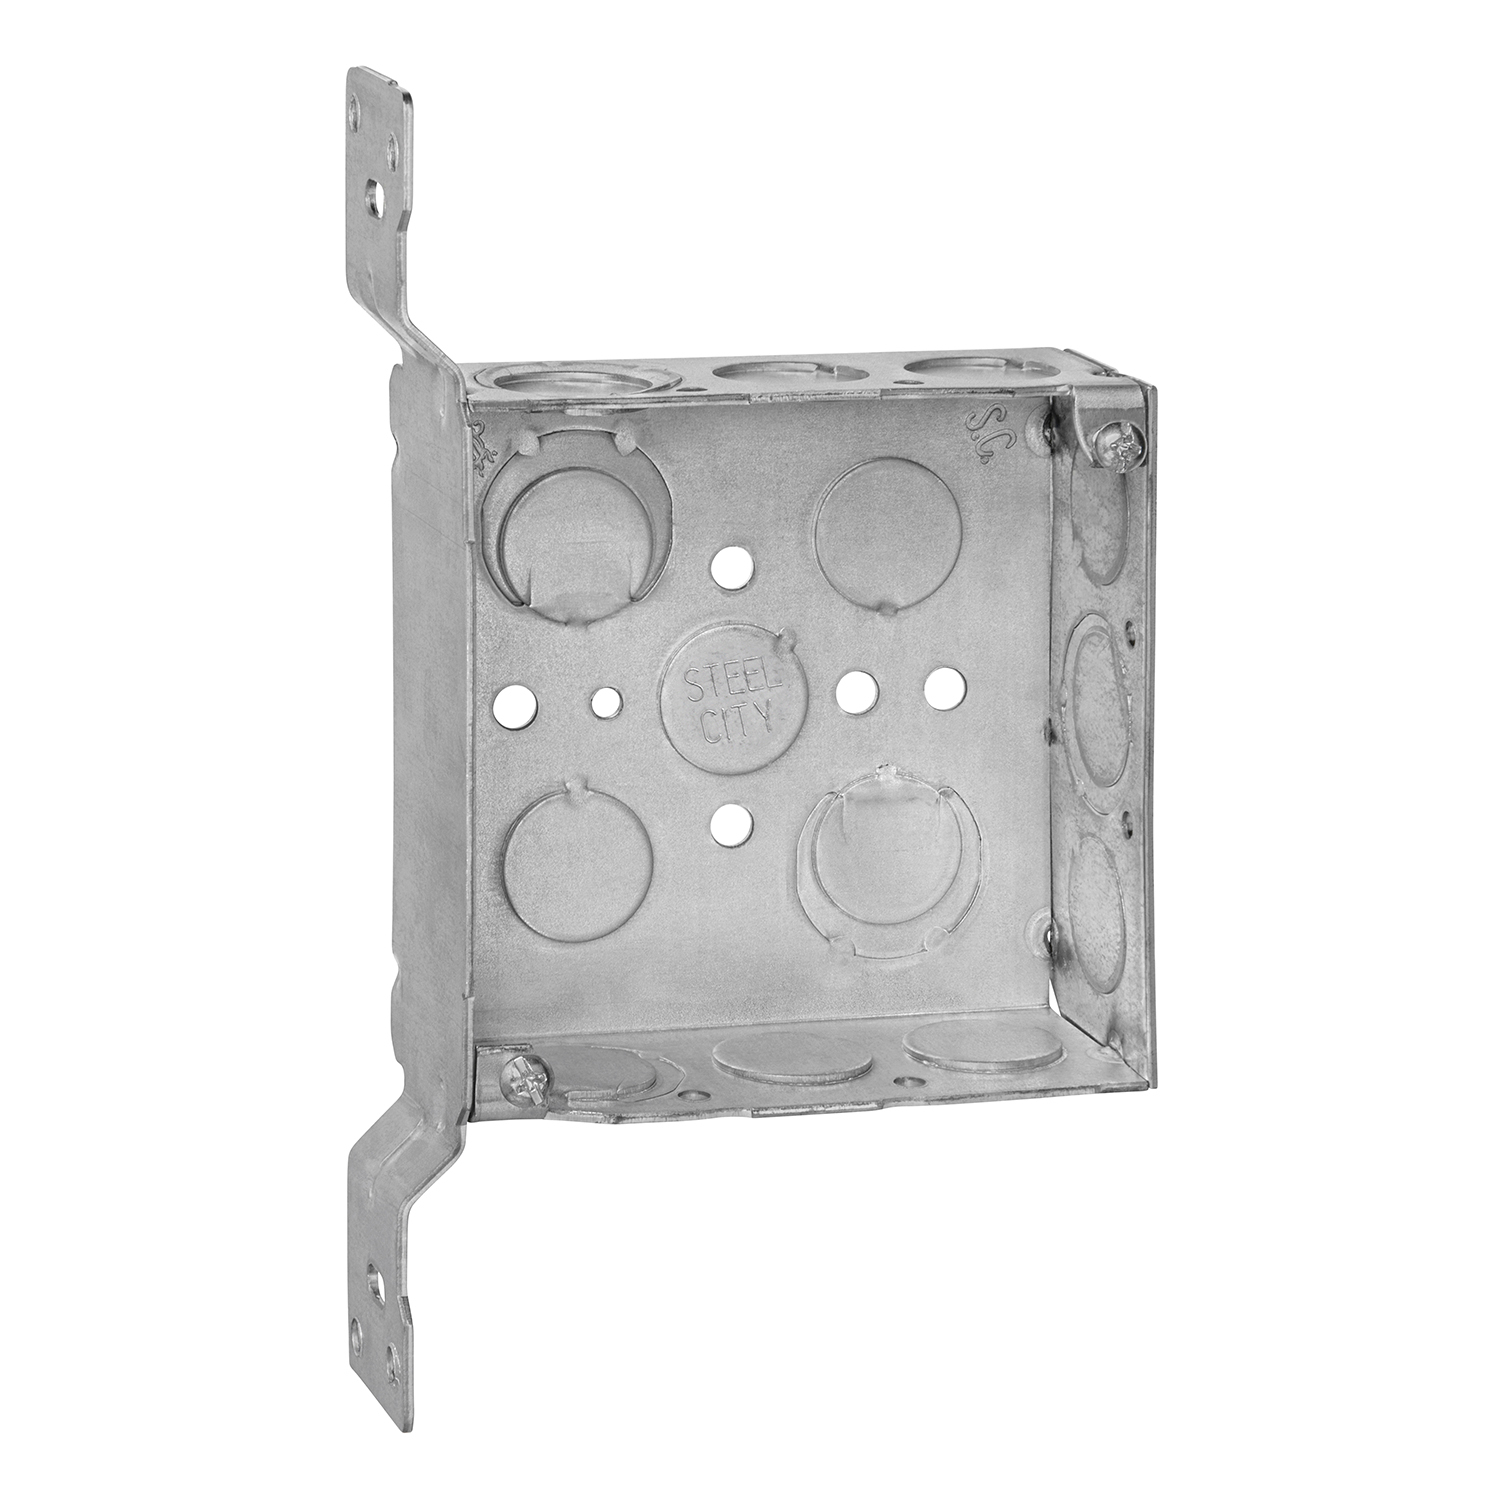 B-Bracket and 1/2-Inch and 3/4-Inch Eccentric Knockouts Thomas & Betts Steel City 52151-BN Pre-Galvanized Steel Square Box with C-5 Non-Metallic Cable Clamps